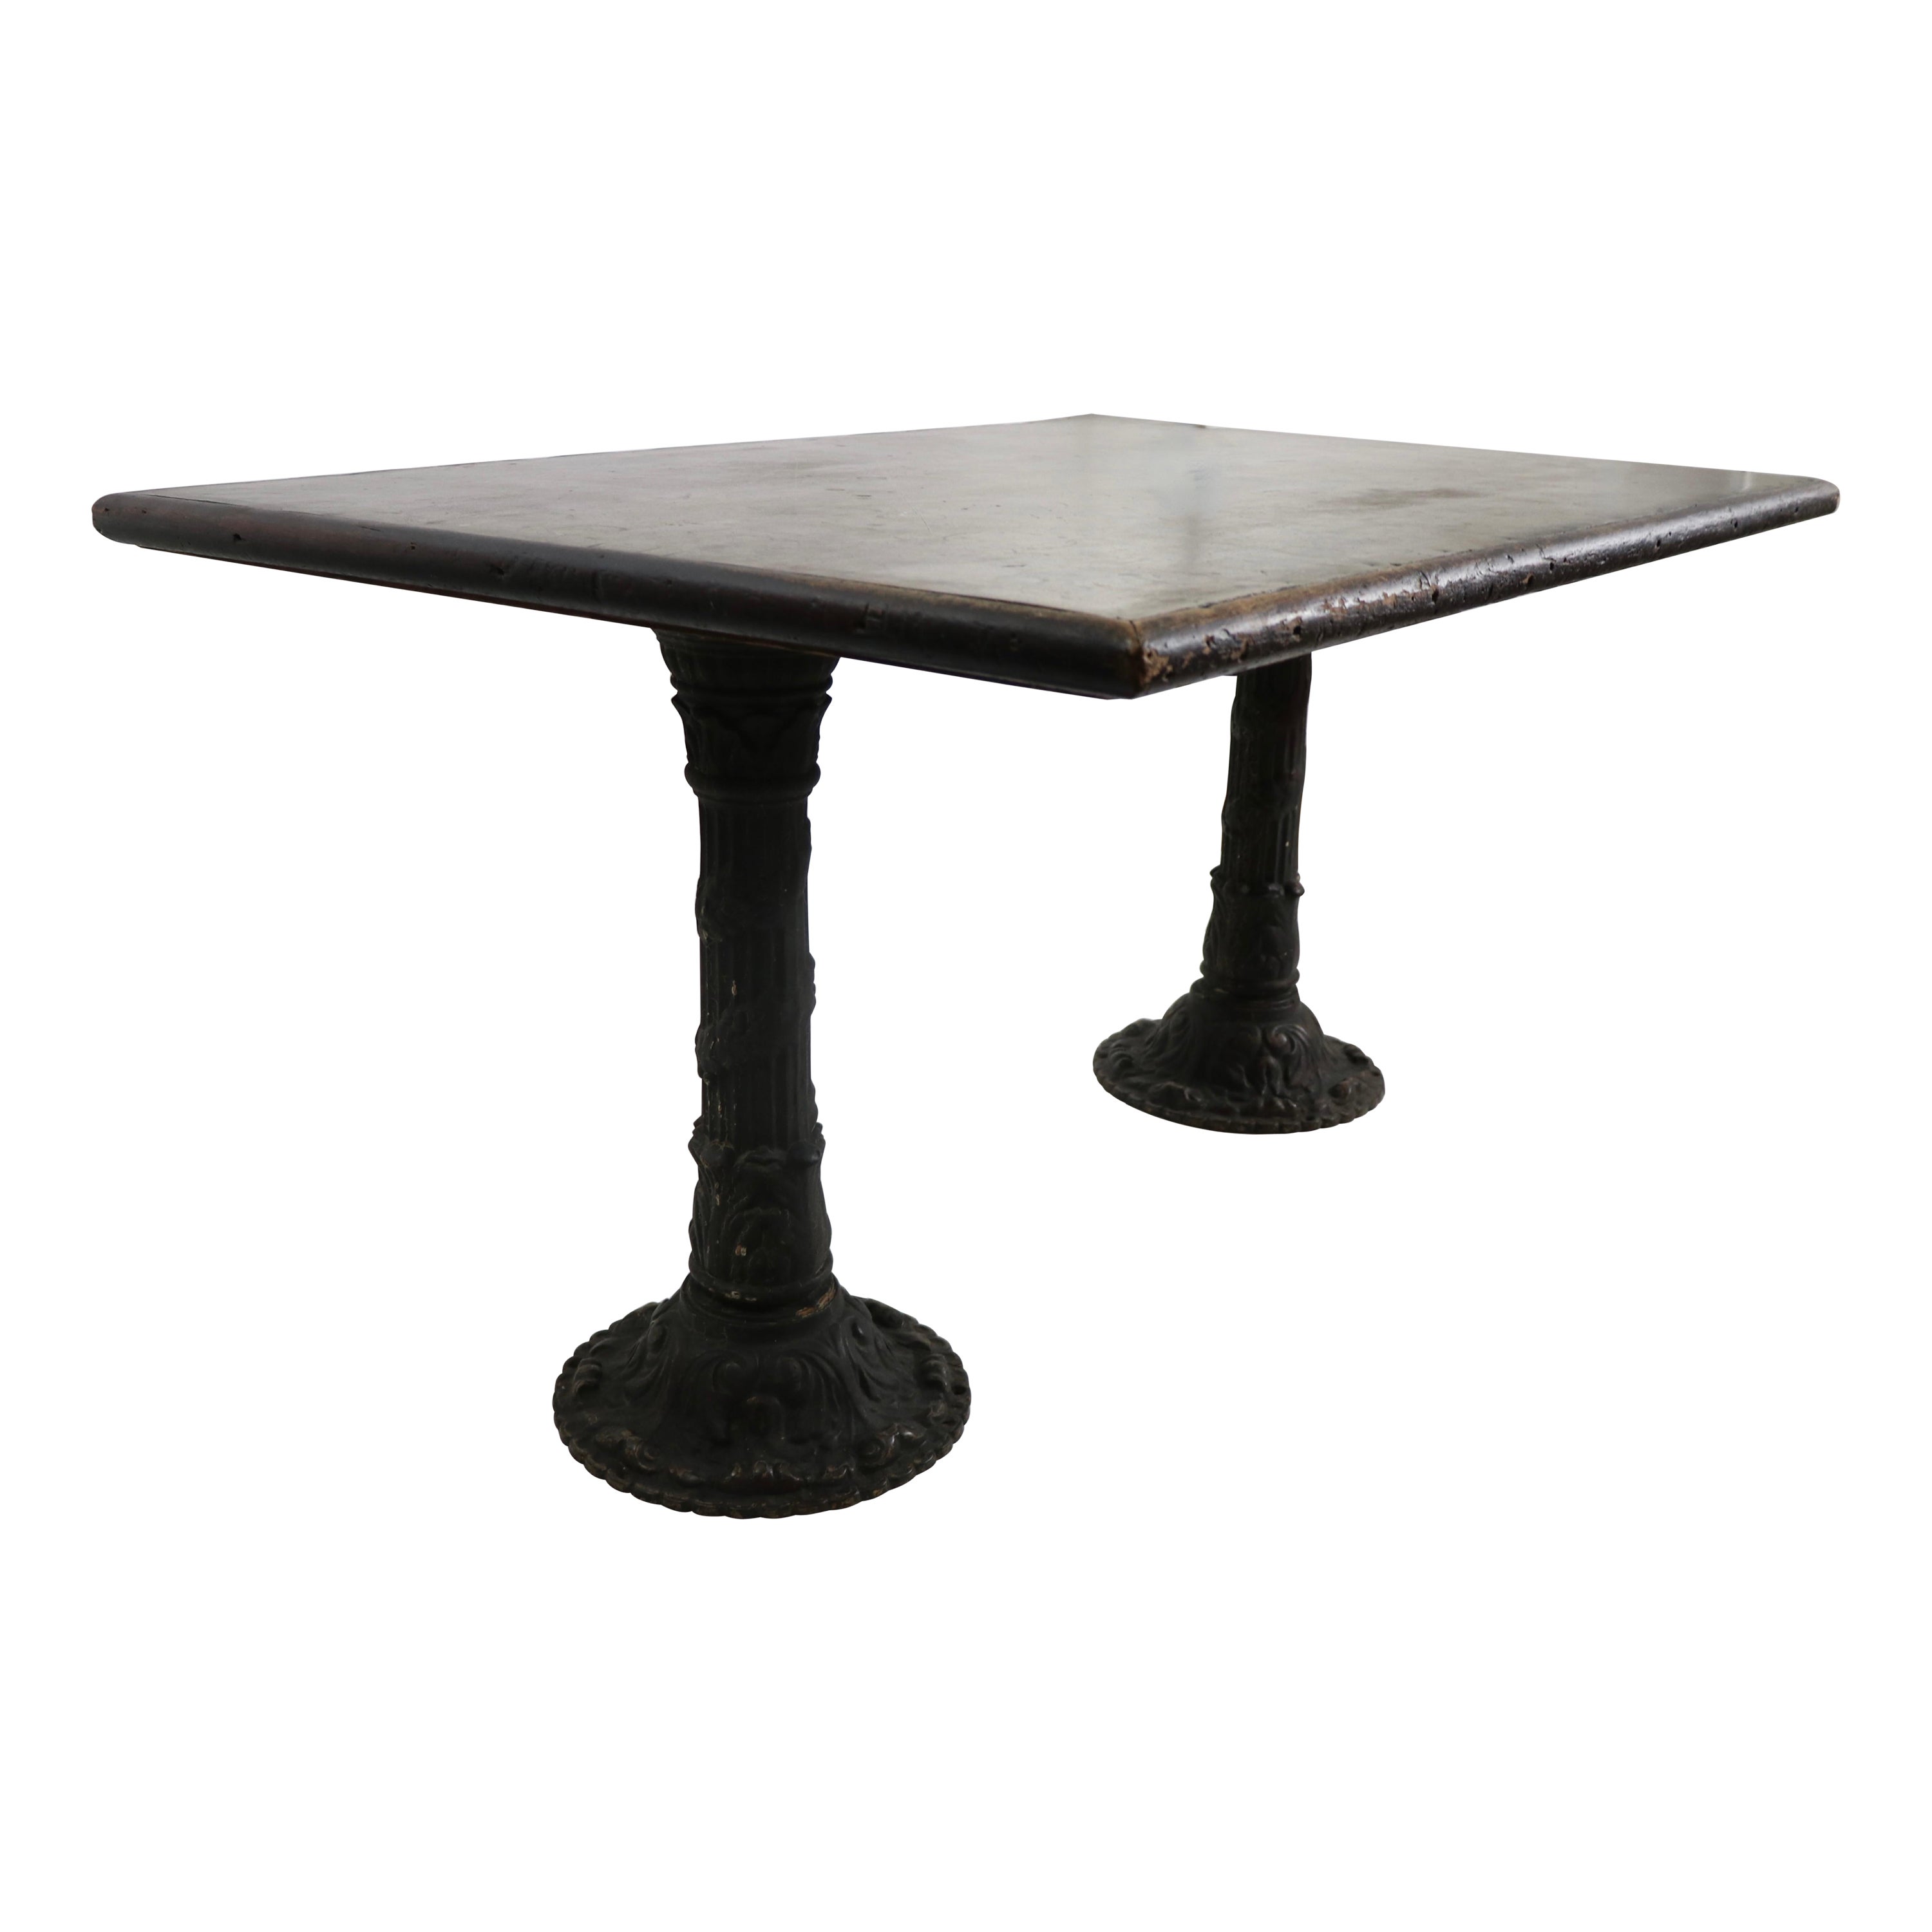 Rustic Farm Work Dining Table For Sale